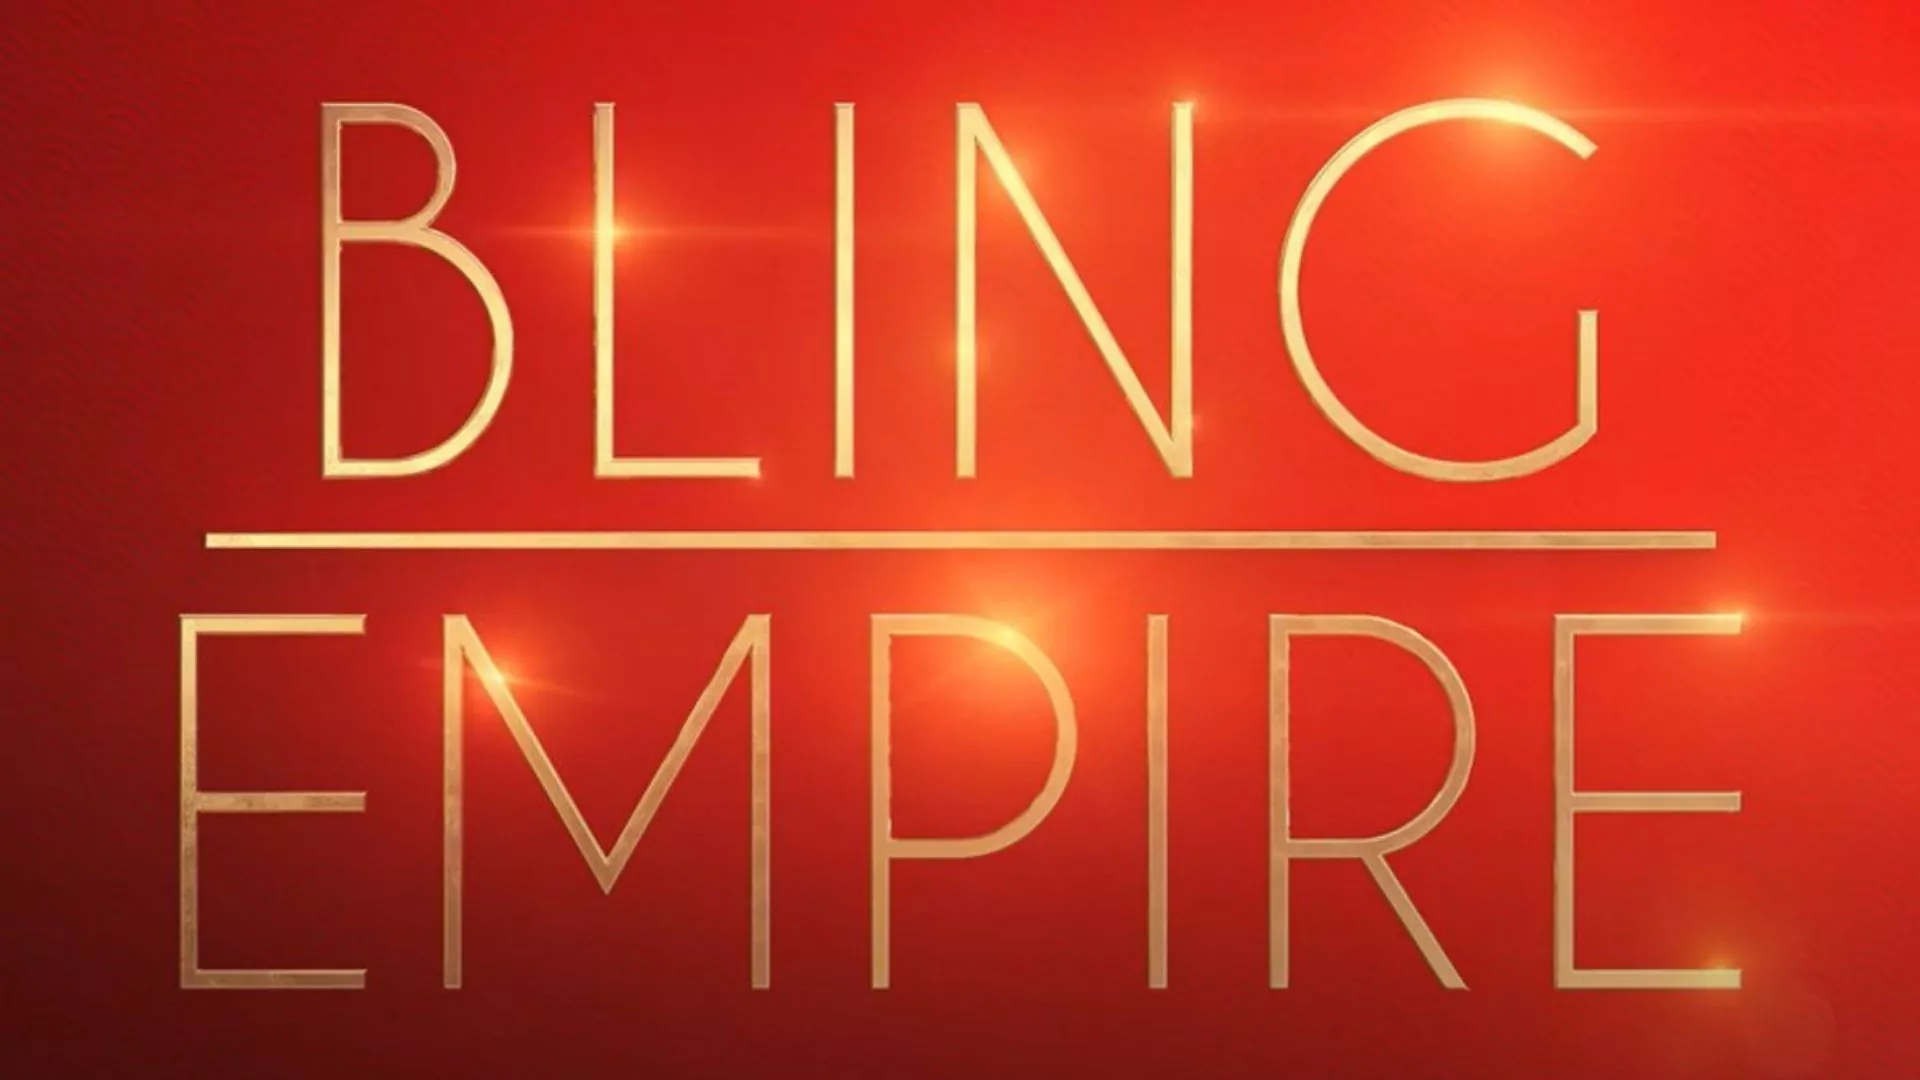 Bling Empire Wallpaper and Images